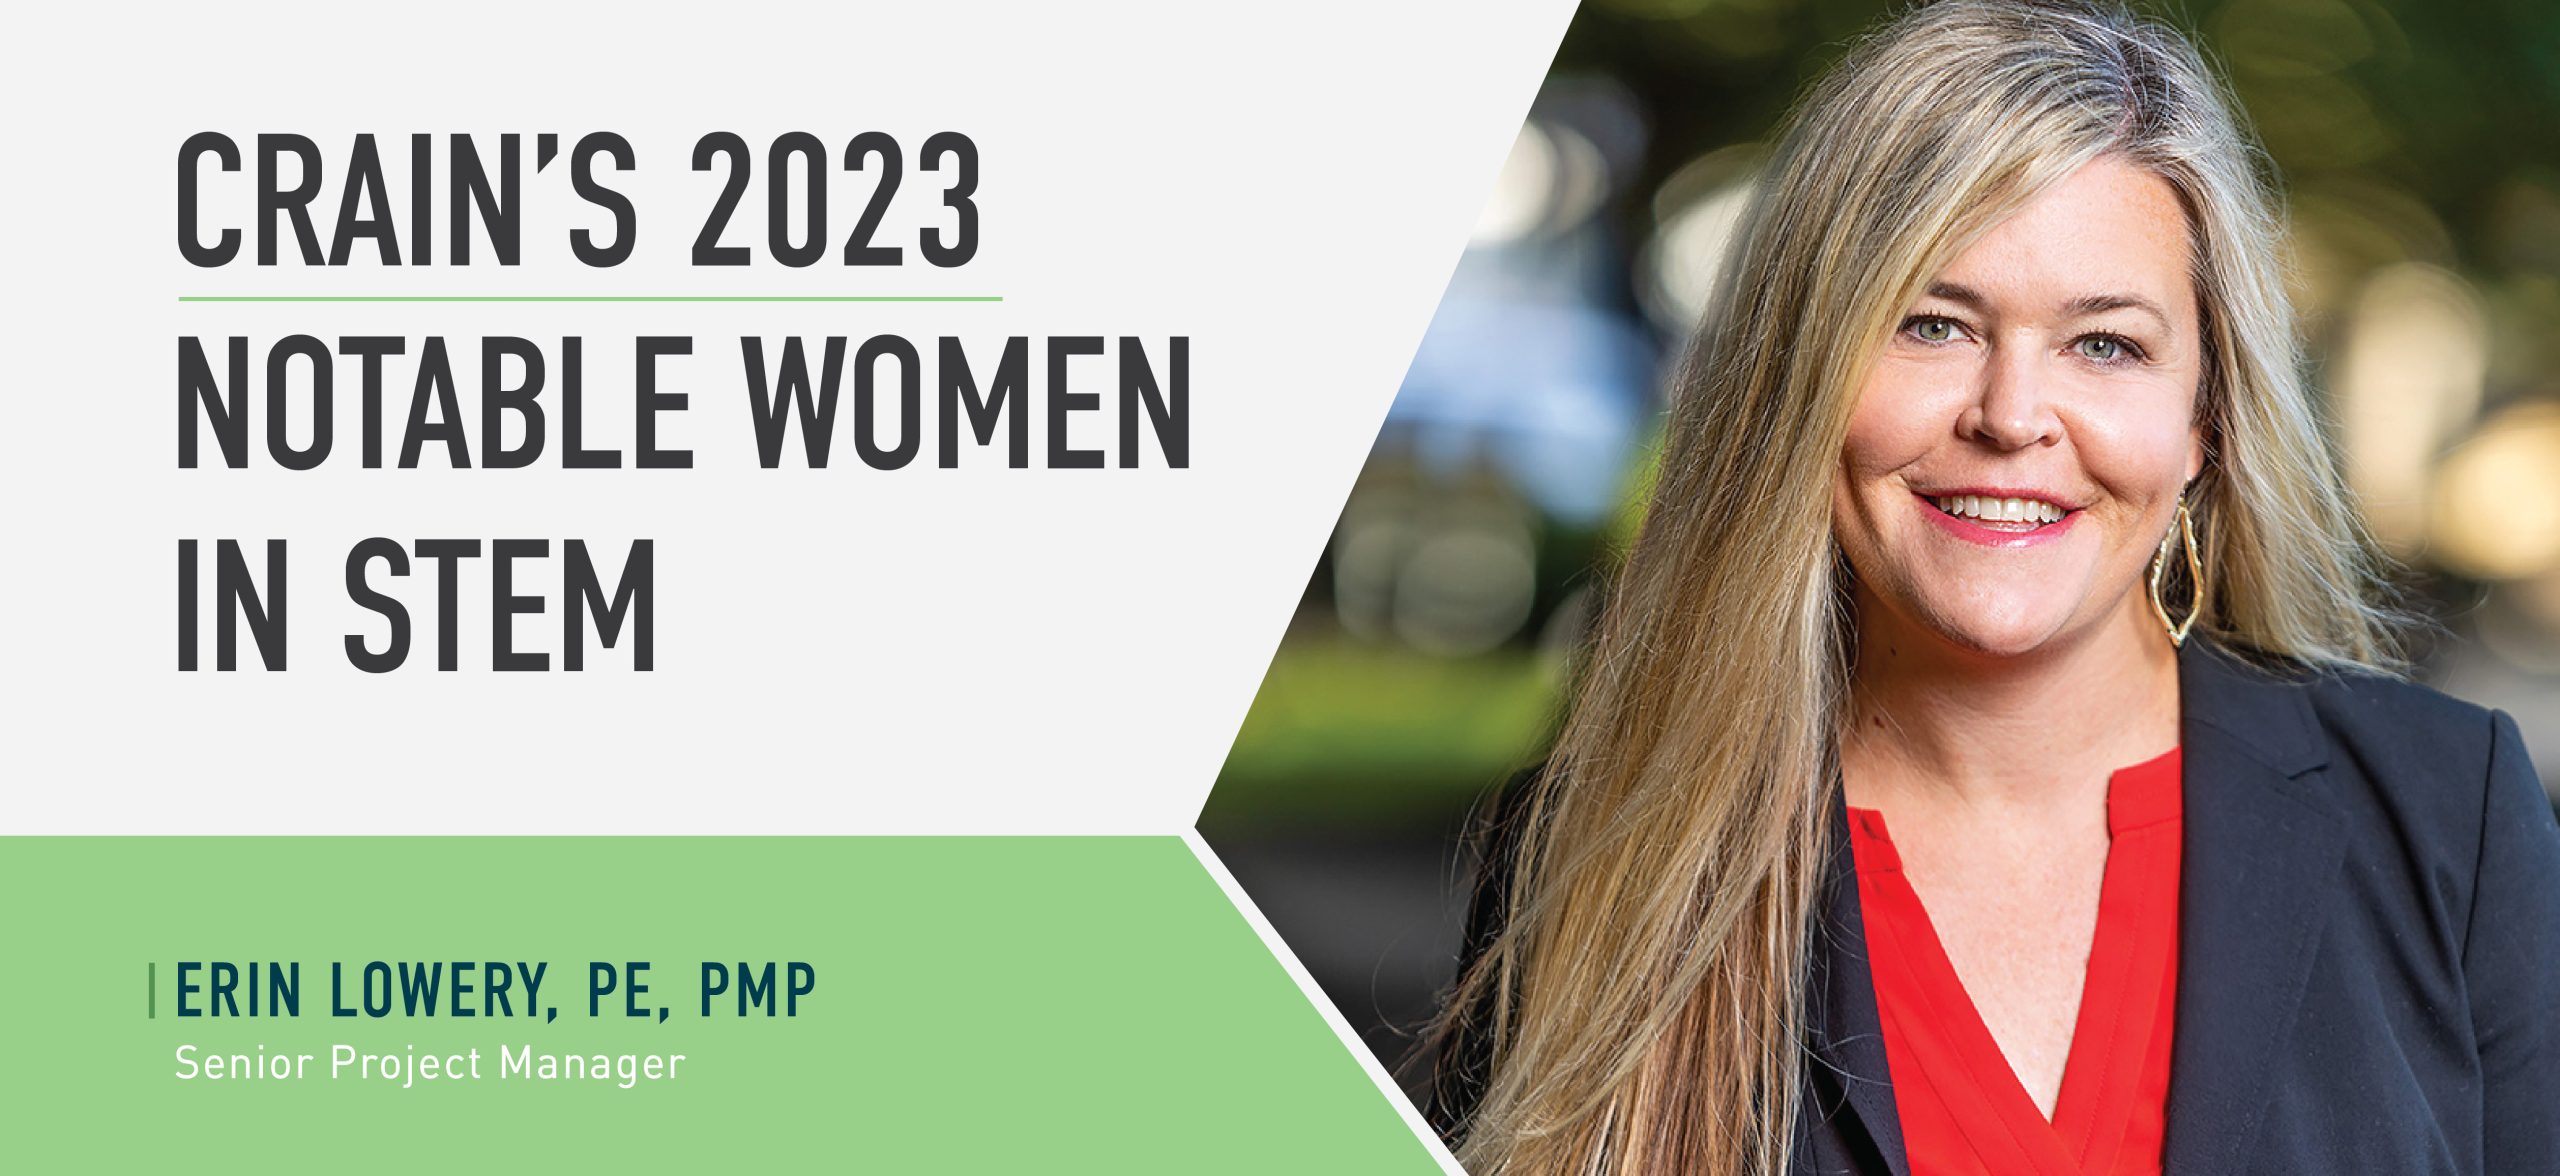 Erin Lowery, Senior Project Manager, Named to Crain’s Notable Women in STEM 2023